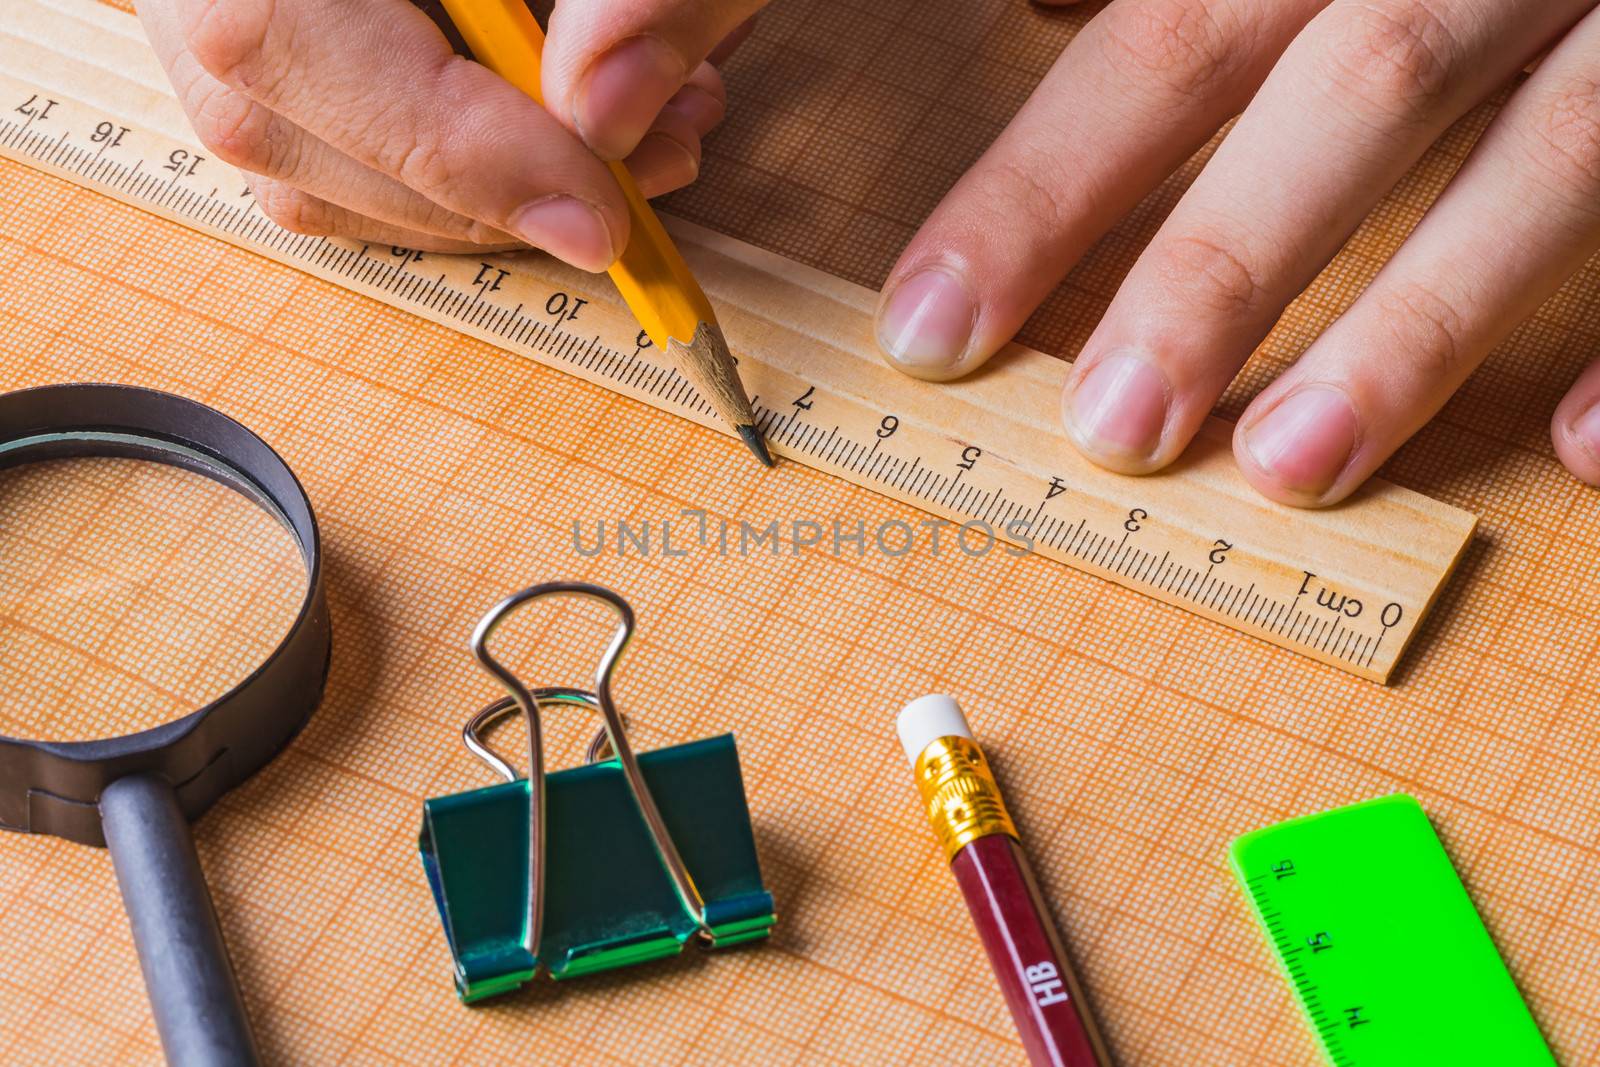 draftsman draws on a ruler on the graph paper